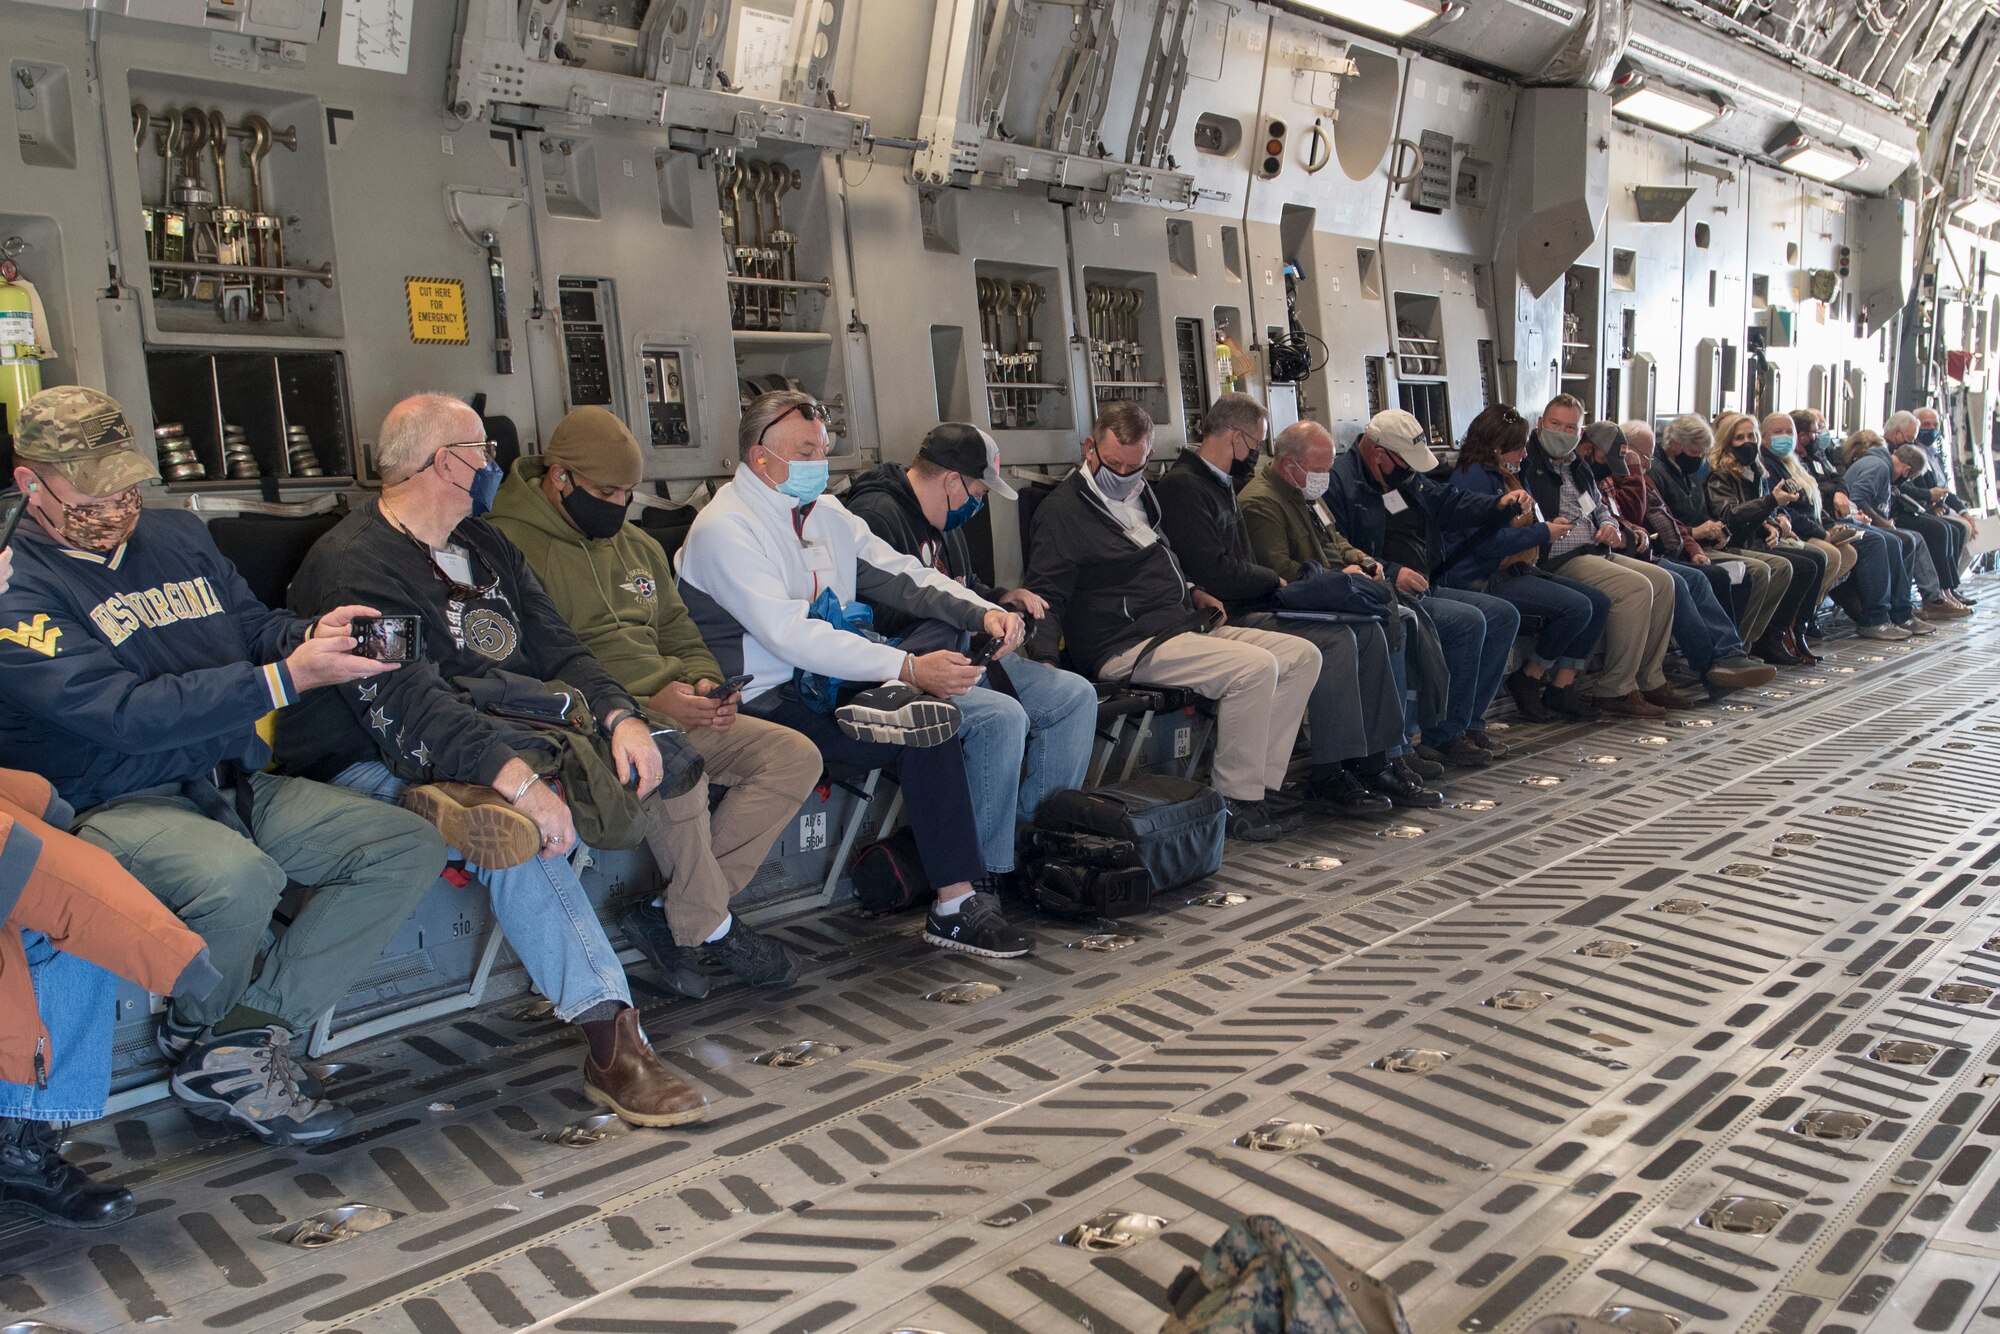 Employers participating in the Employer Support of the Guard and Reserve Bosslift event at the 167th Airlift Wing, Nov. 9, 2021, wait for take-off on a C-17 Globemaster III aircraft. Participants toured the Martinsburg, West Virginia air base and learned about the mission of the unit as well as the ESGR during the event. (U.S. Air National Guard photo by Senior Master Sgt. Emily Beightol-Deyerle)